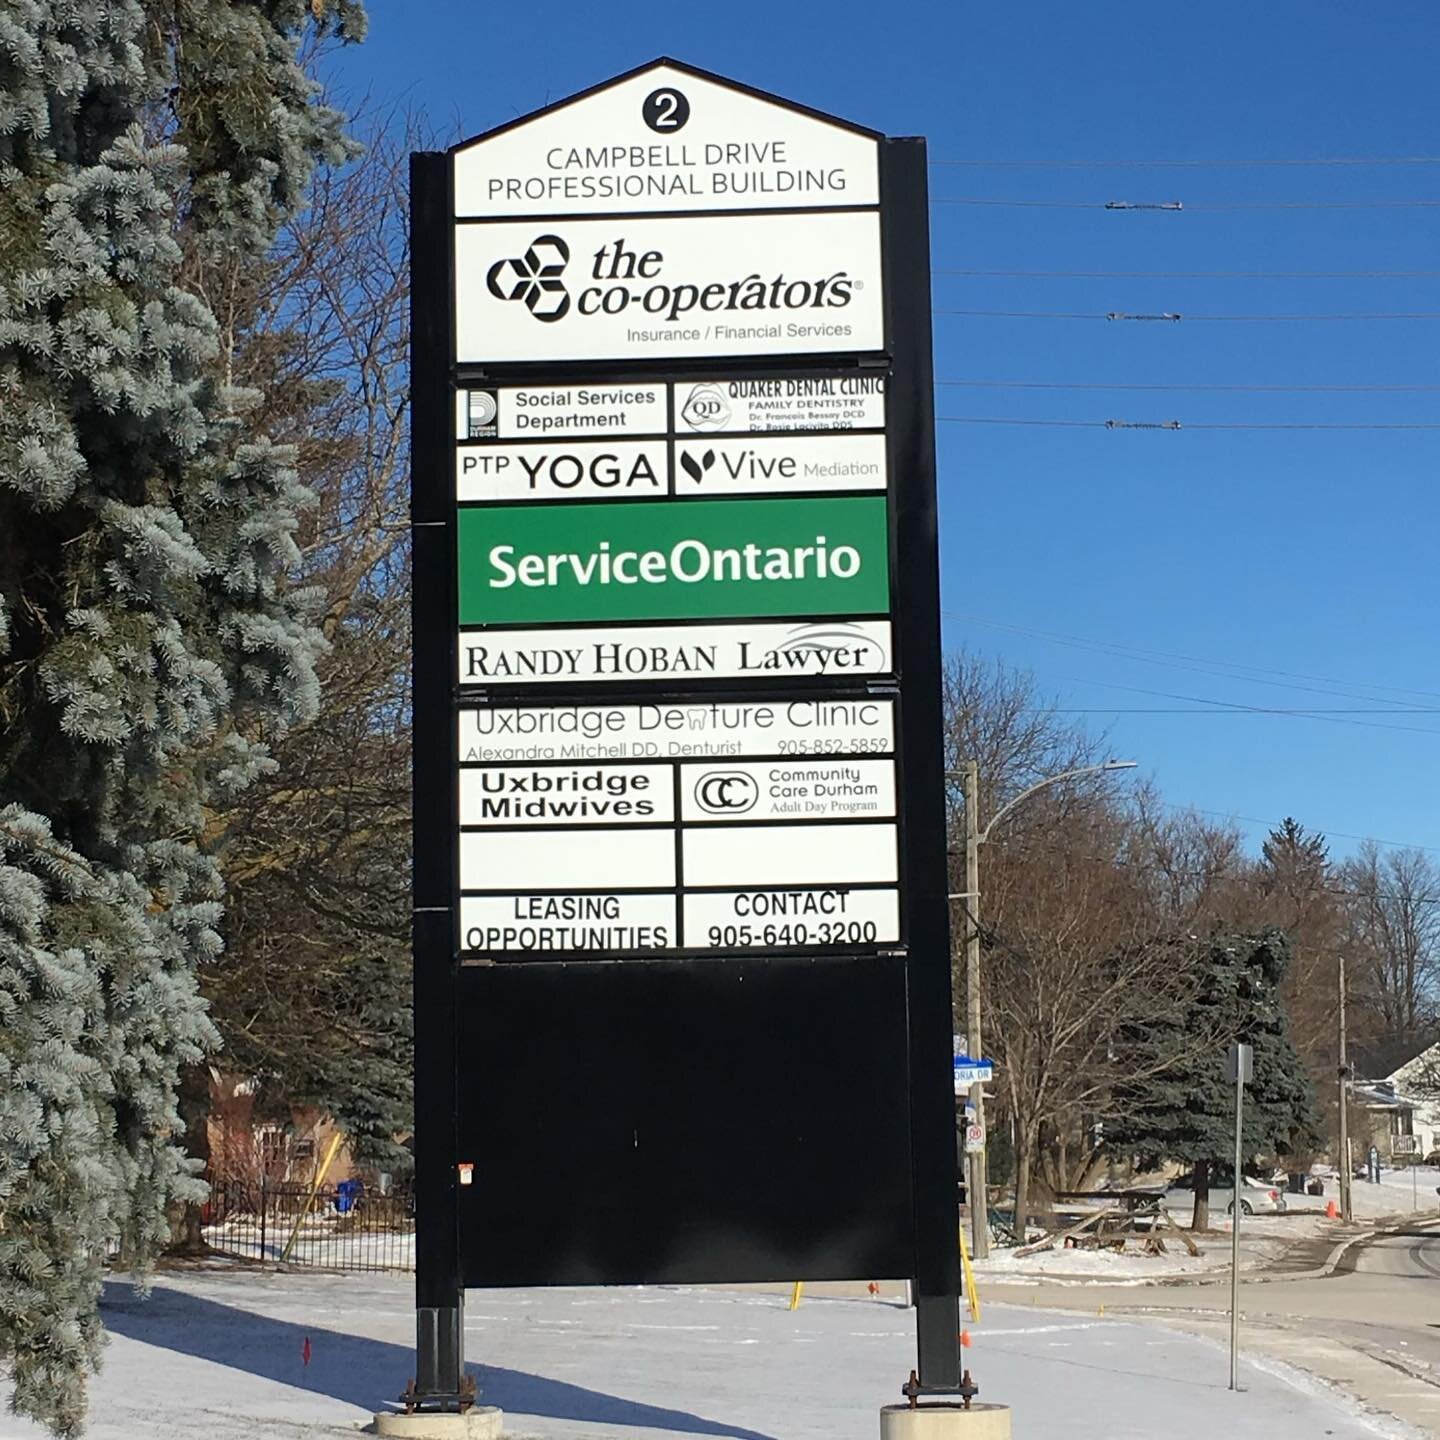 Can&rsquo;t believe I have been at 2 Campbell Drive for over 2 years now!&nbsp;&nbsp;With the big letters &ldquo;YOGA&rdquo; on the front sign, you can&rsquo;t miss me!
#frontsign #campbelldrive #pathwaystopeaceyoga #pathwaystopeaceyogaandhealing